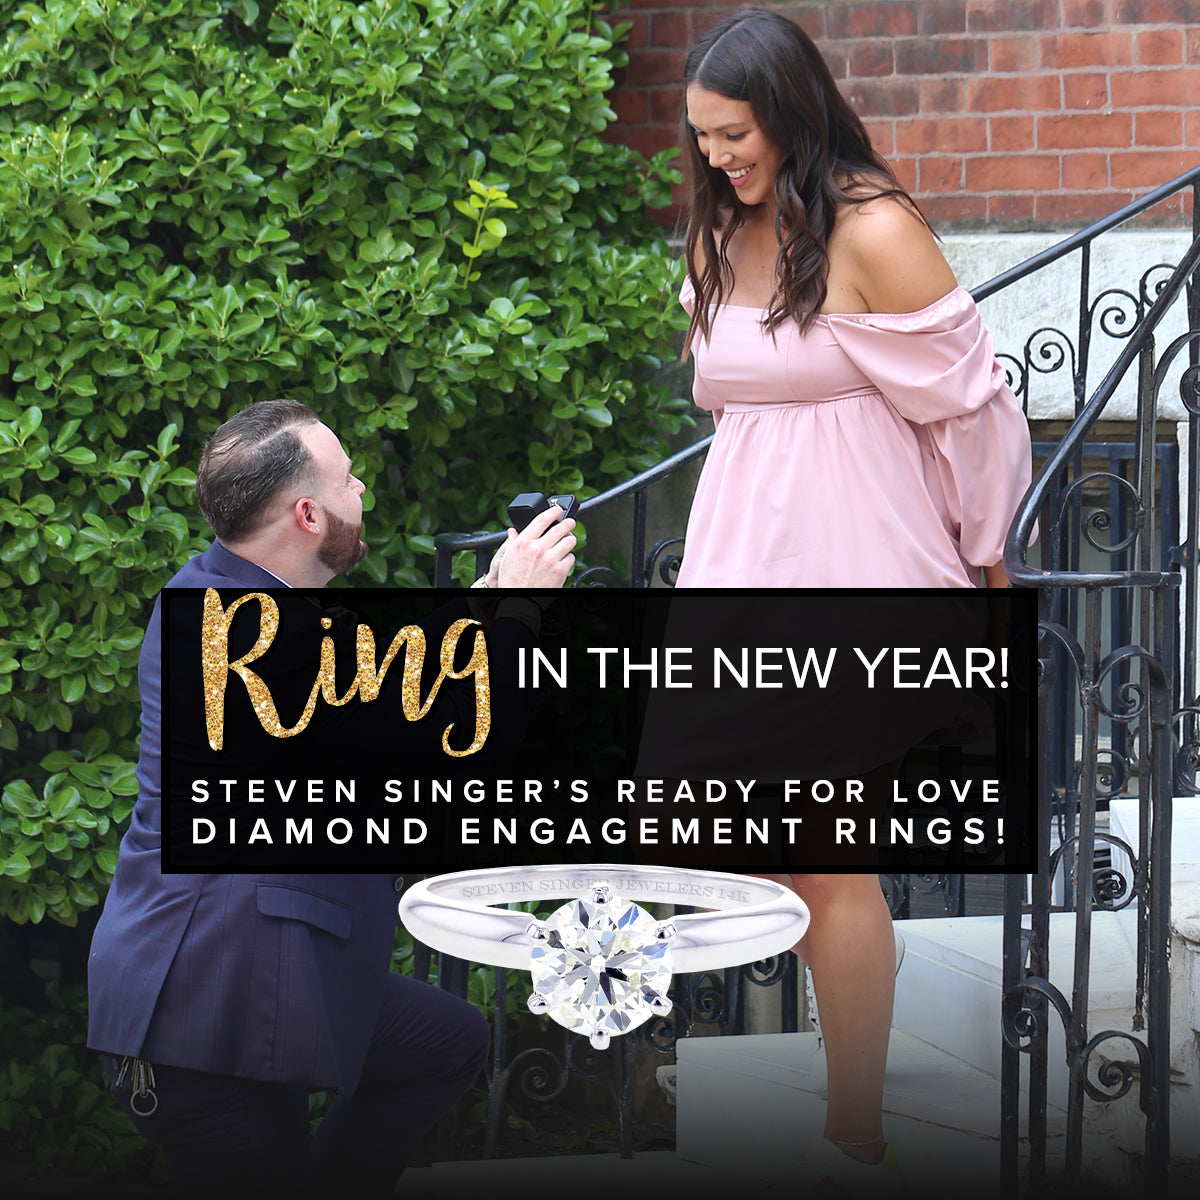 Ring in the New Year! Steven Singer's Ready for Love Diamond Engagement Rings. A man proposes to a woman. A one carat round diamond solitaire from Steven Singer Jewelers is pictured.